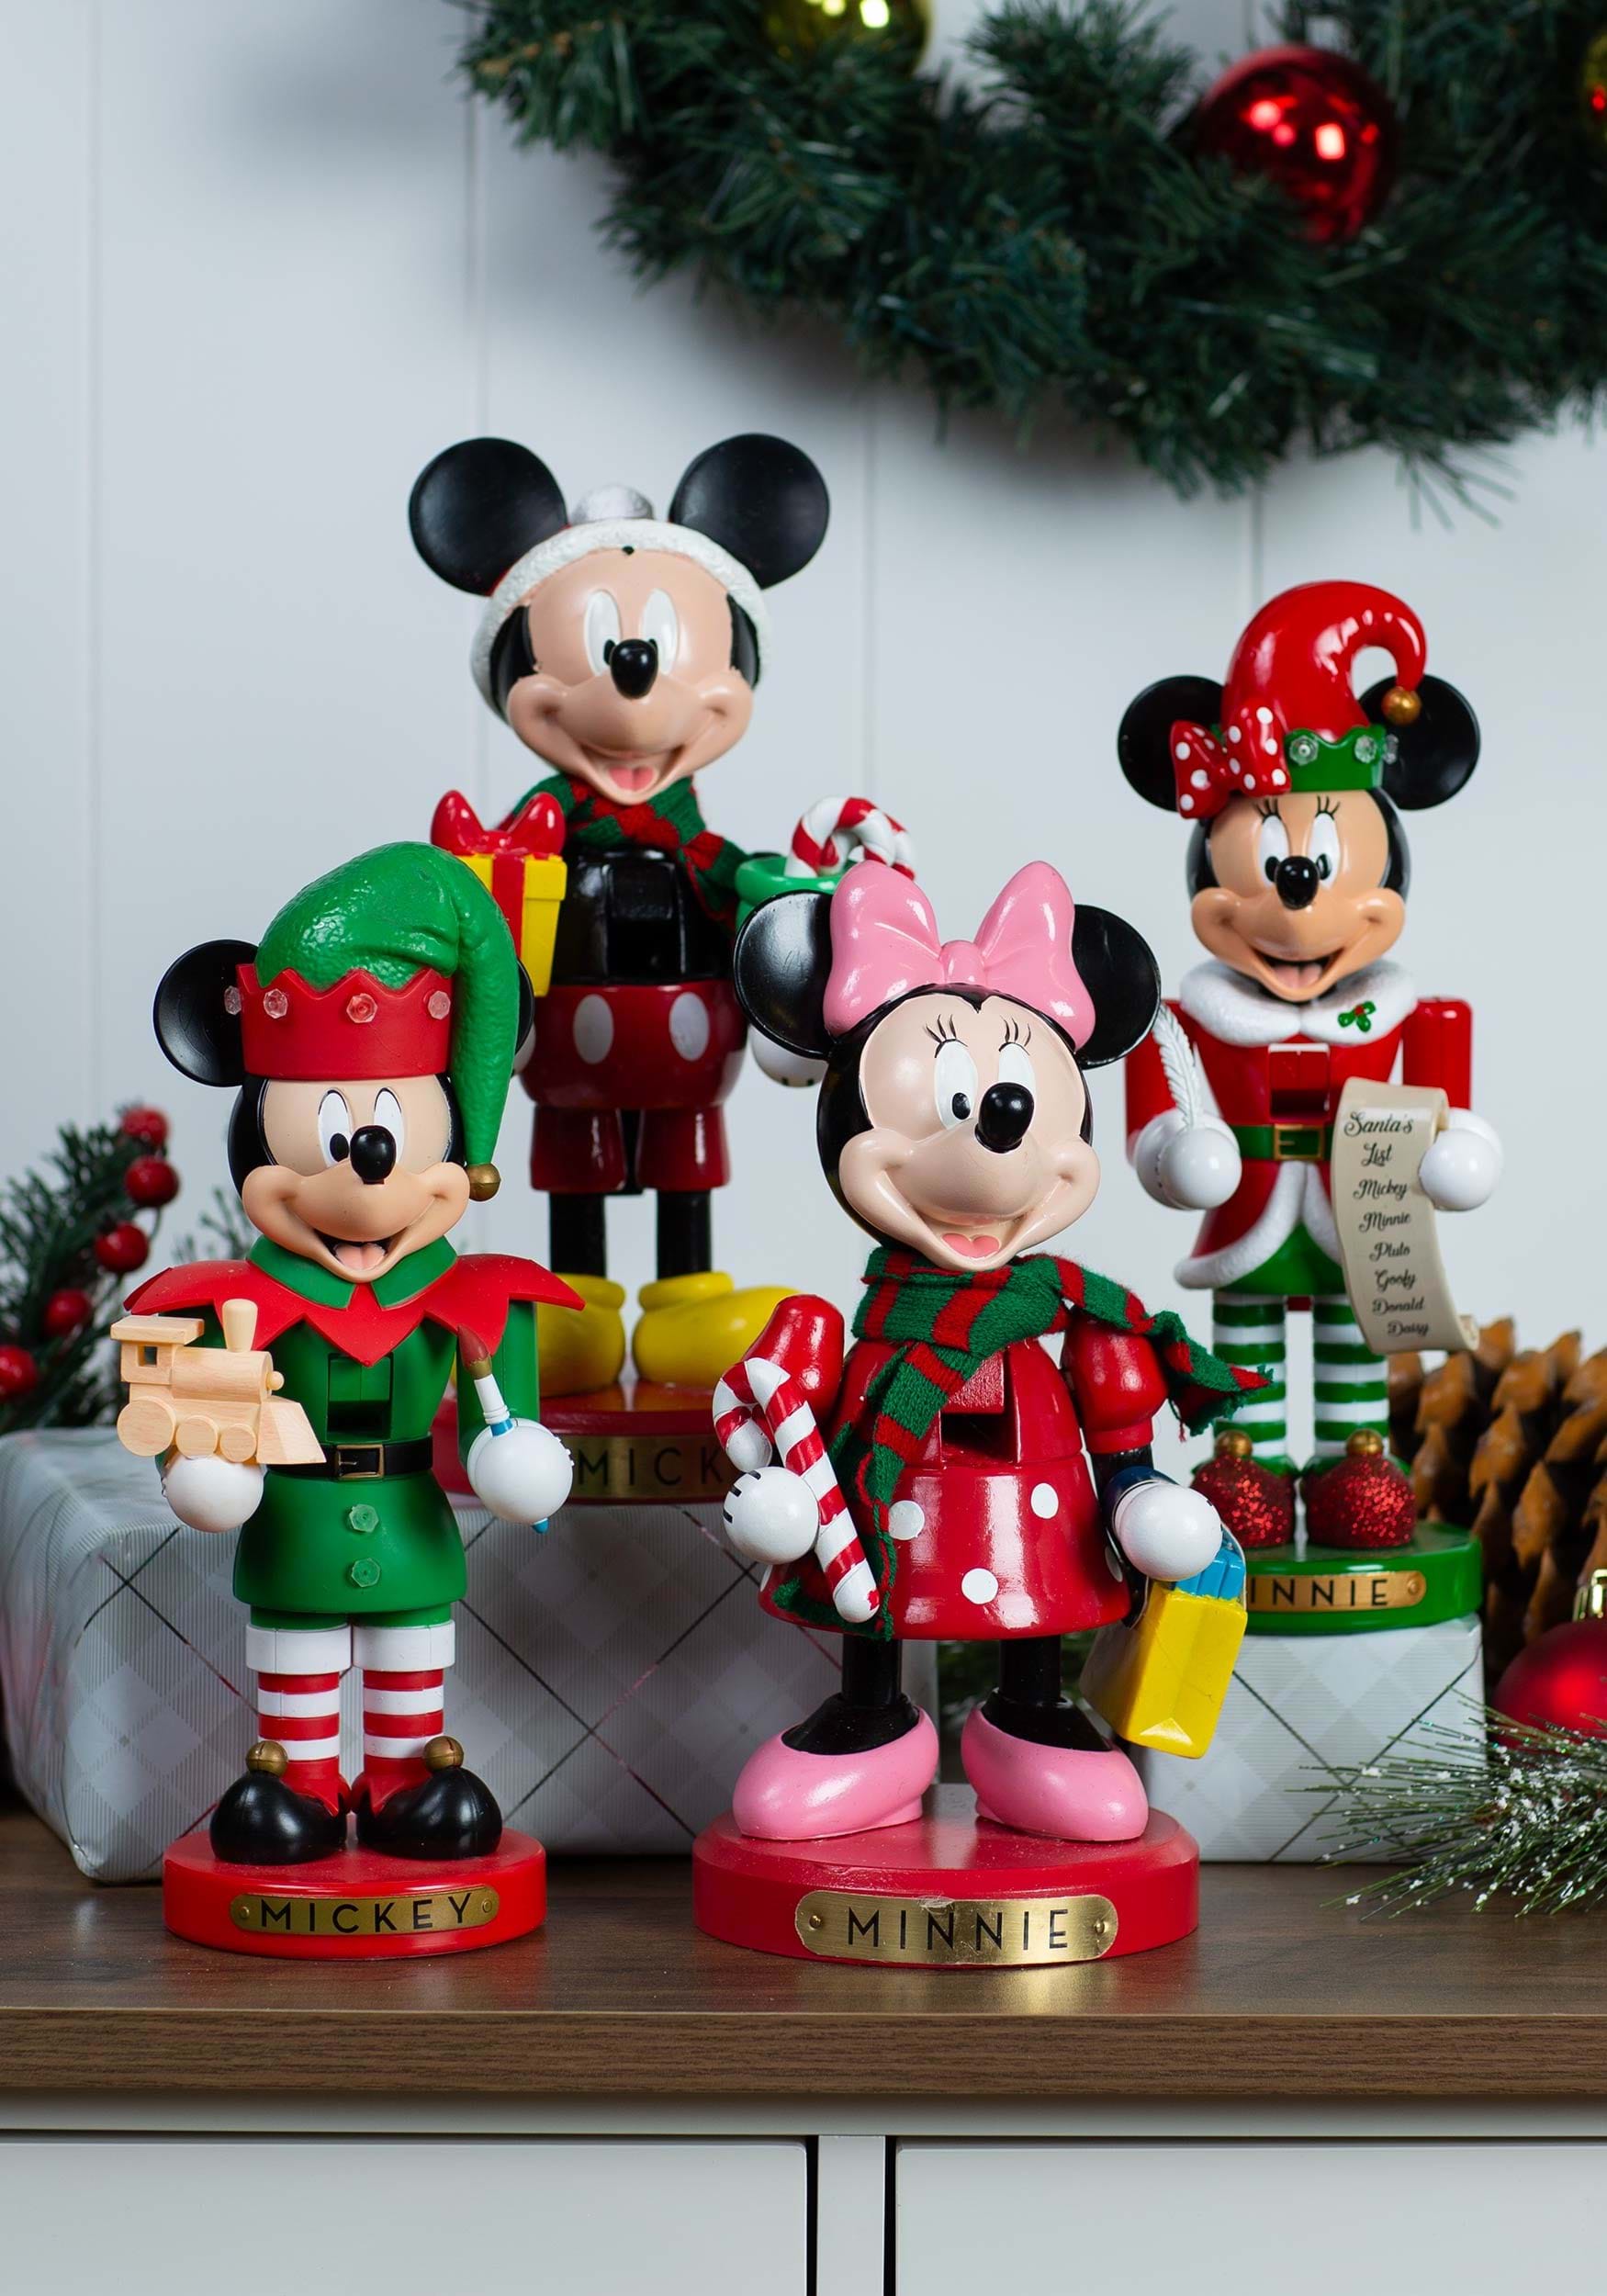 10 Inch Minnie Mouse With Candy Cane Nutcracker , Disney Christmas Decorations